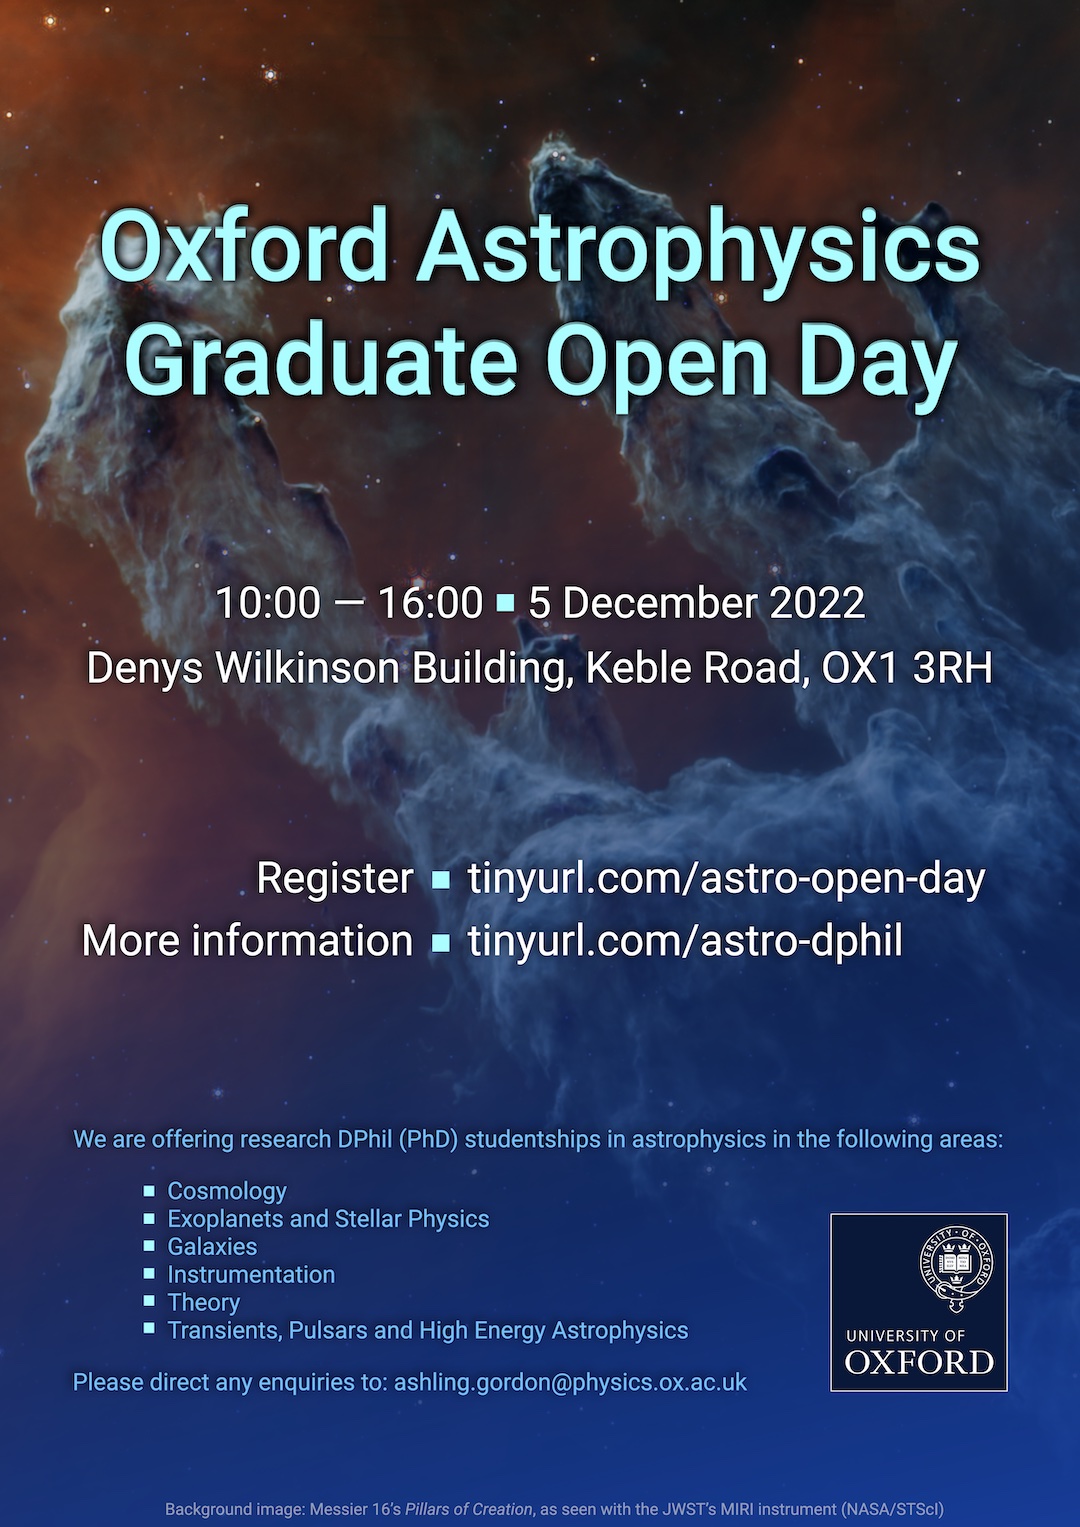 The 2022 Oxford Astrophysics Graduate Open Day poster